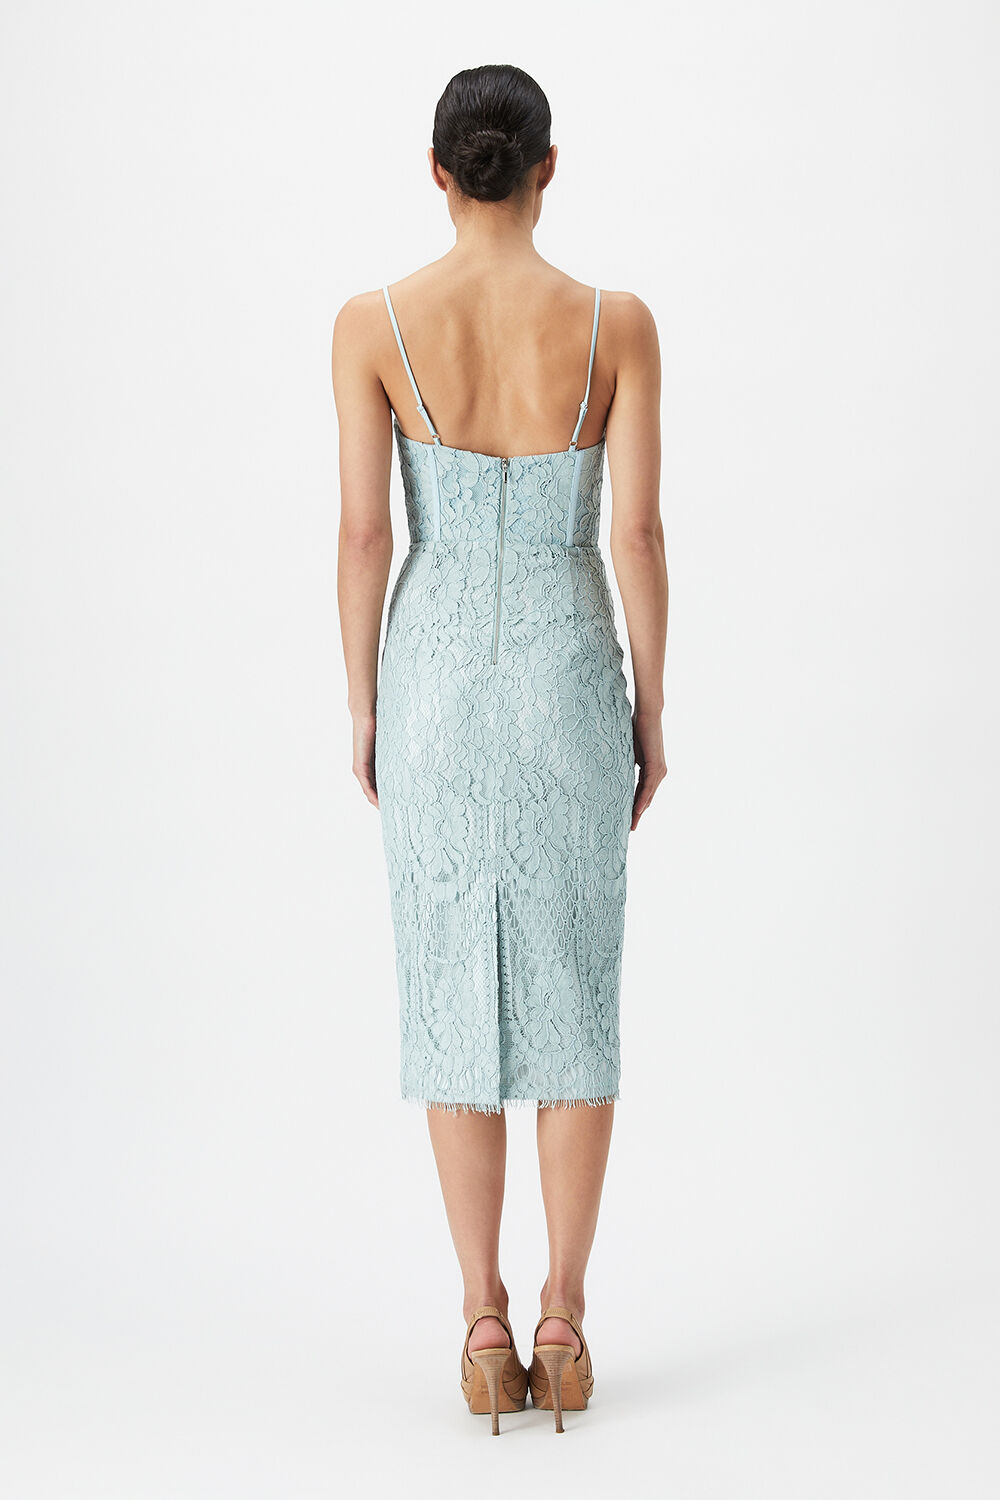 FLORENCE MIDI LACE DRESS in colour GREEN LILY